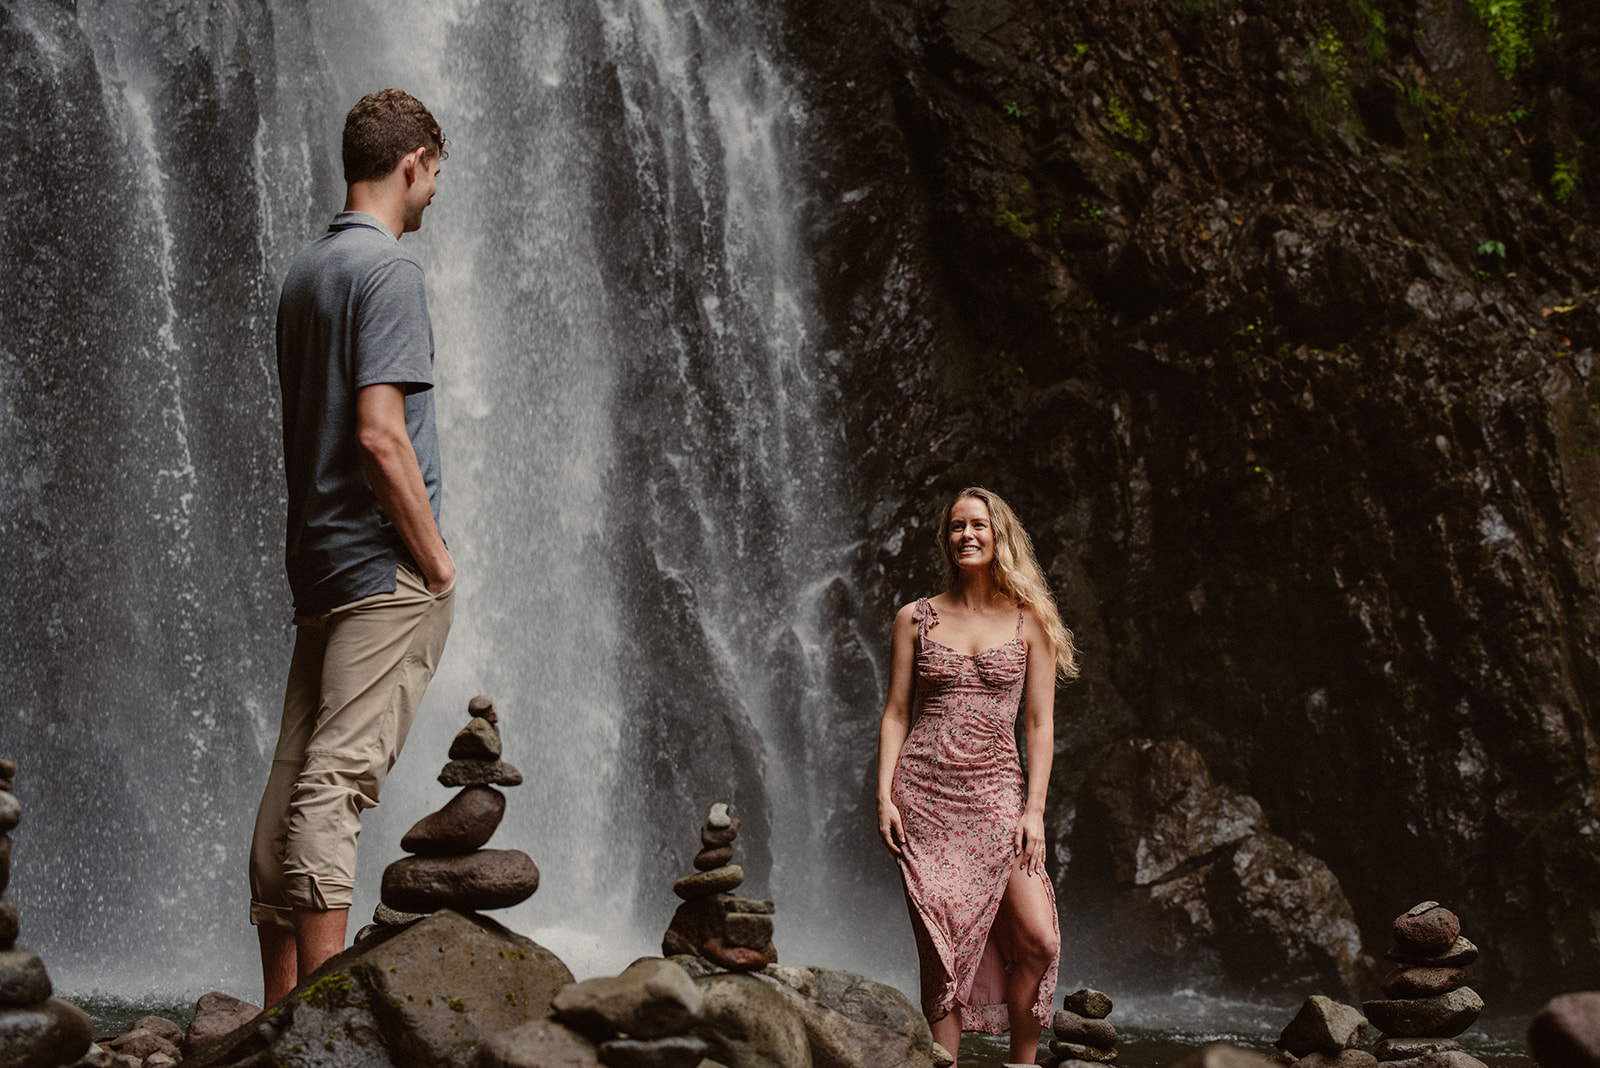 El Tigre Waterfall, Monteverde, Costa Rica, Couple and engagement session, Joice Dahianna wedding photography